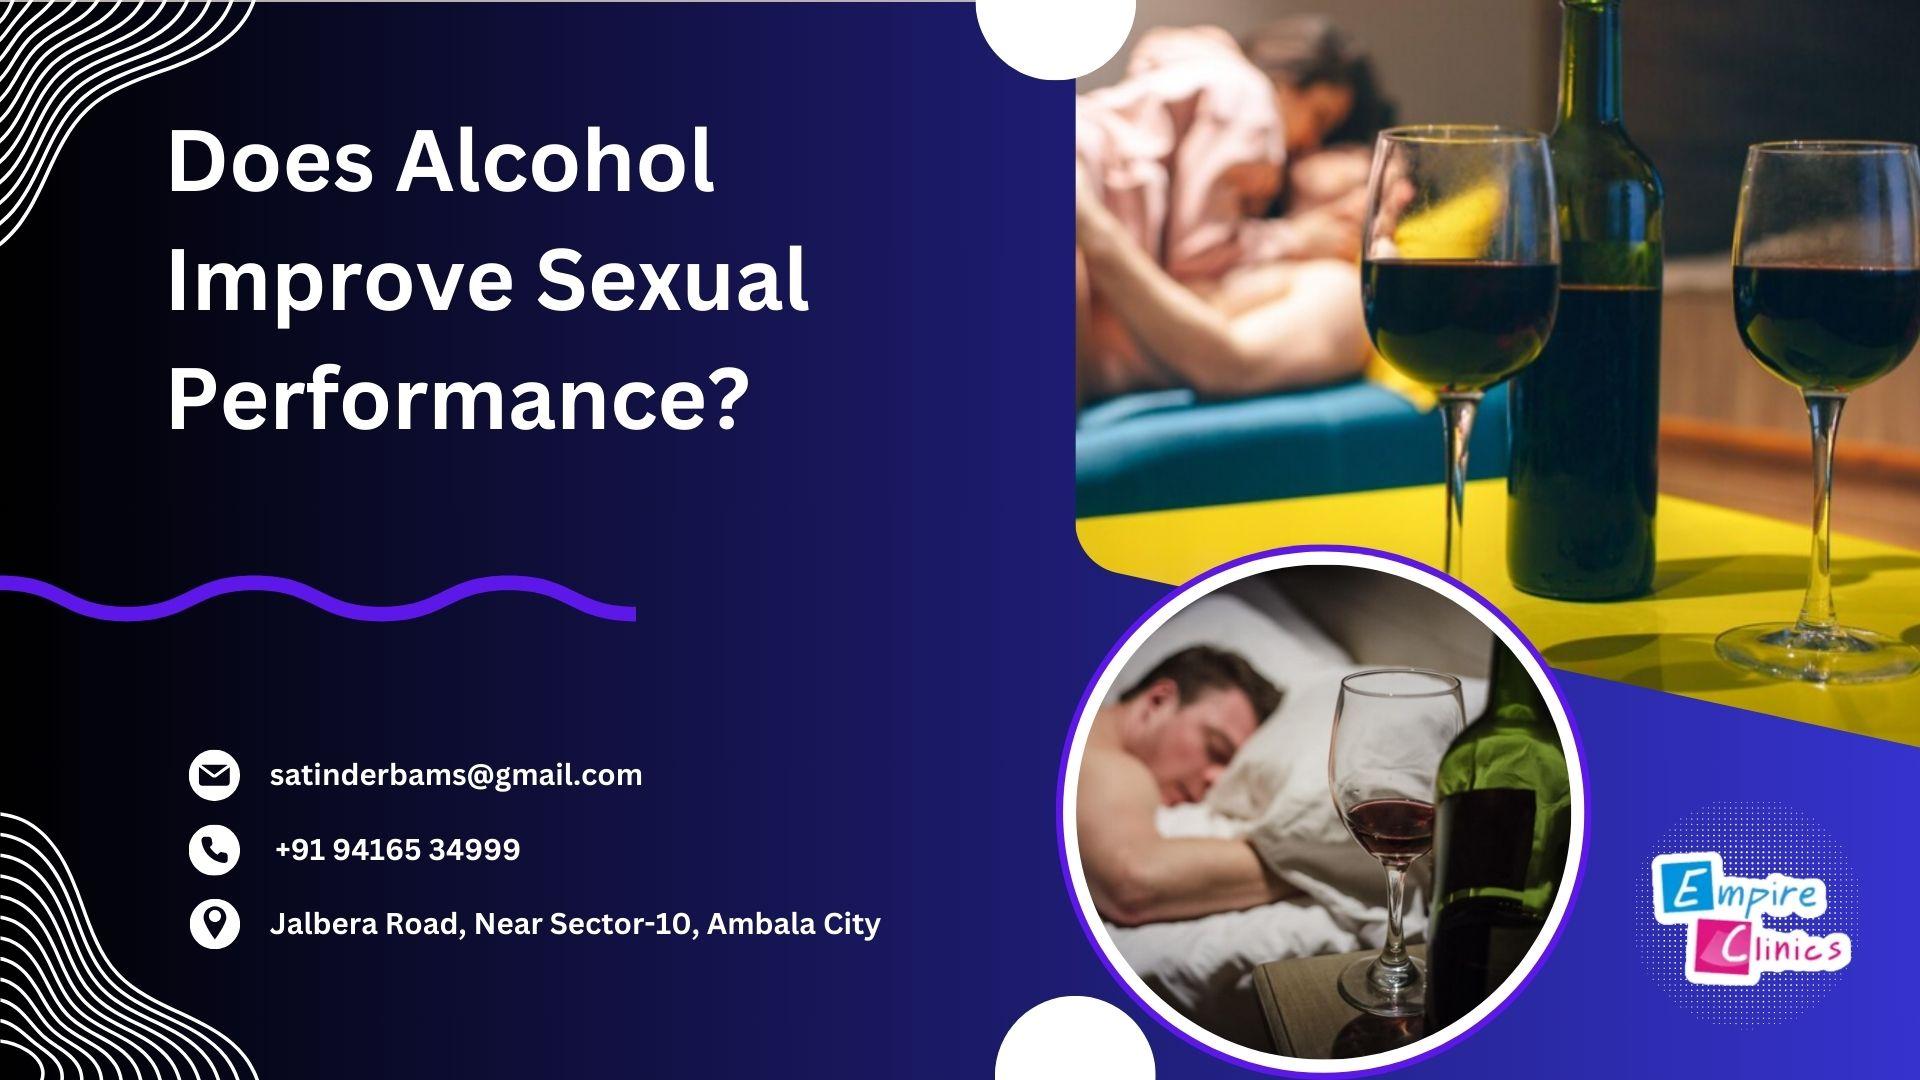 Does Alcohol Improve Sexual Performance?